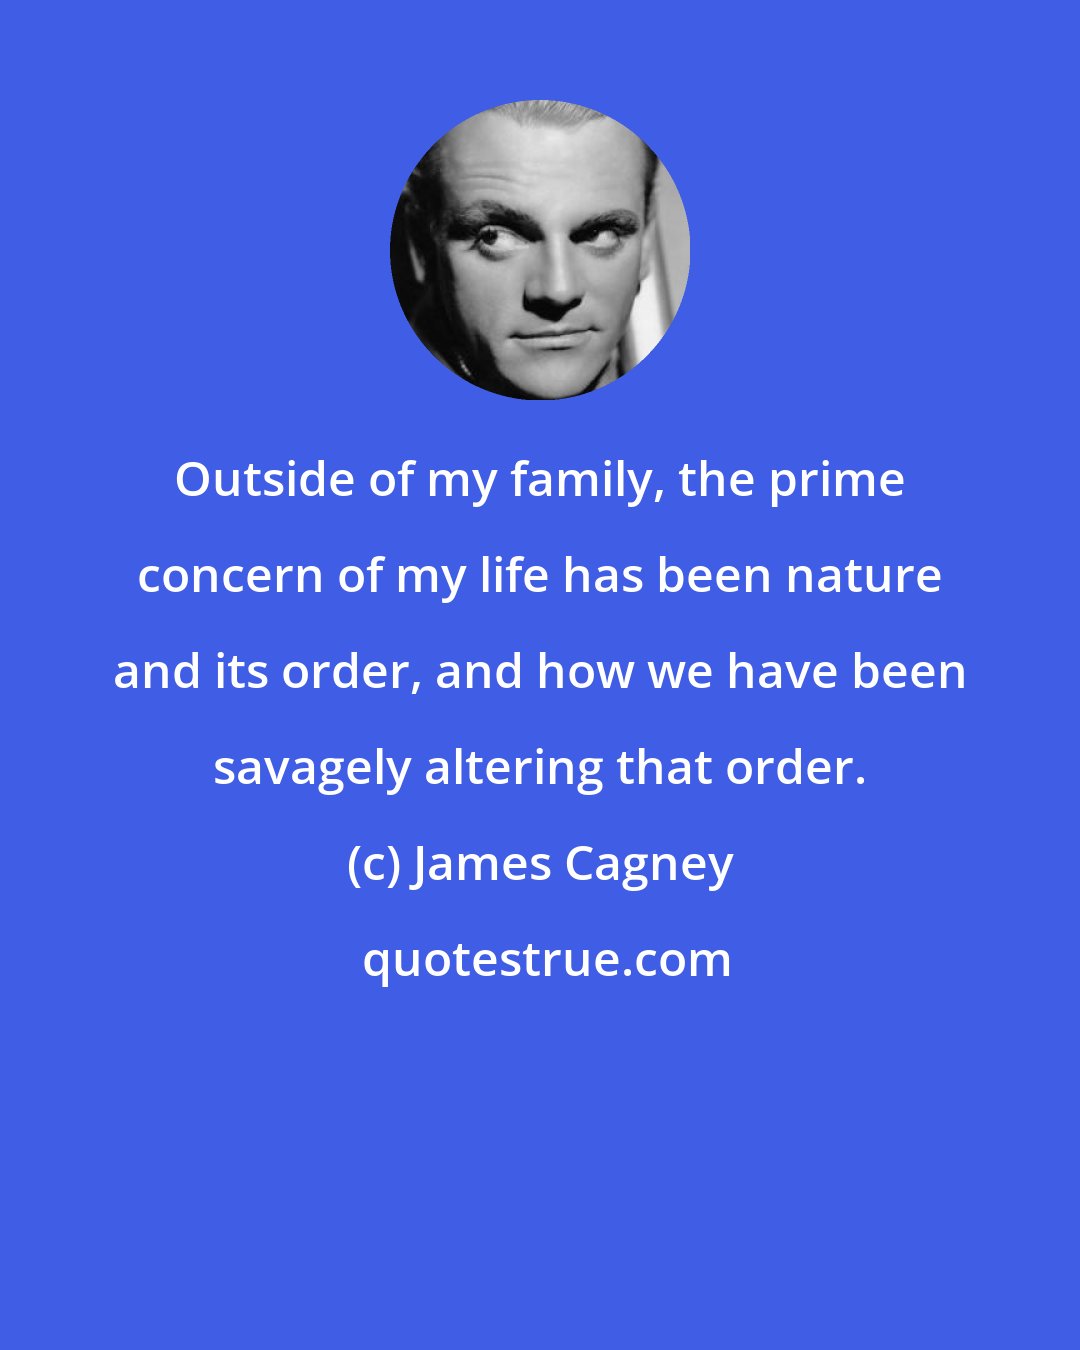 James Cagney: Outside of my family, the prime concern of my life has been nature and its order, and how we have been savagely altering that order.